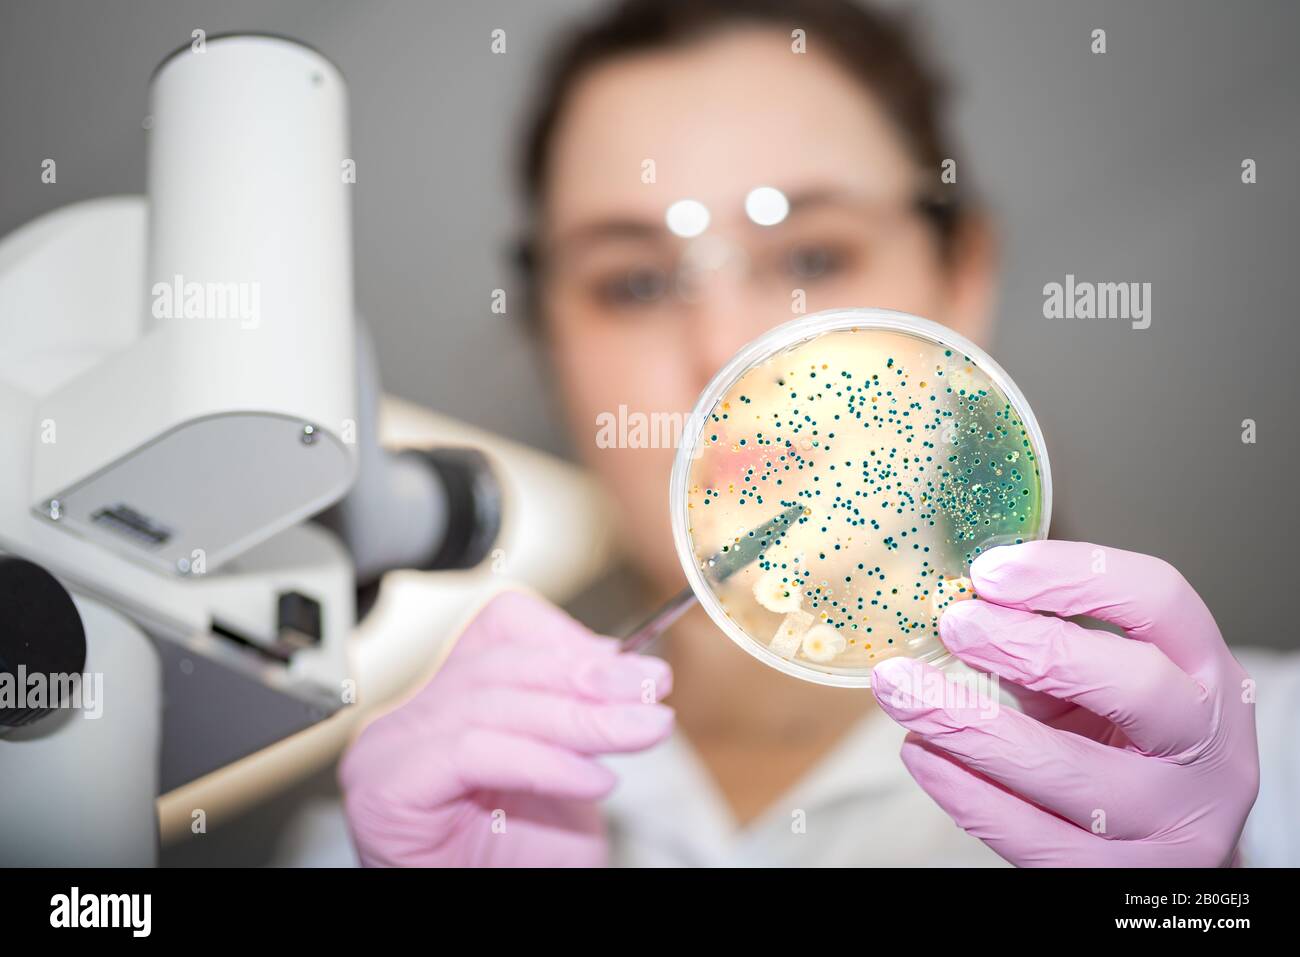 Researcher working in microbiology laboratory with bacterial culture plate Stock Photo